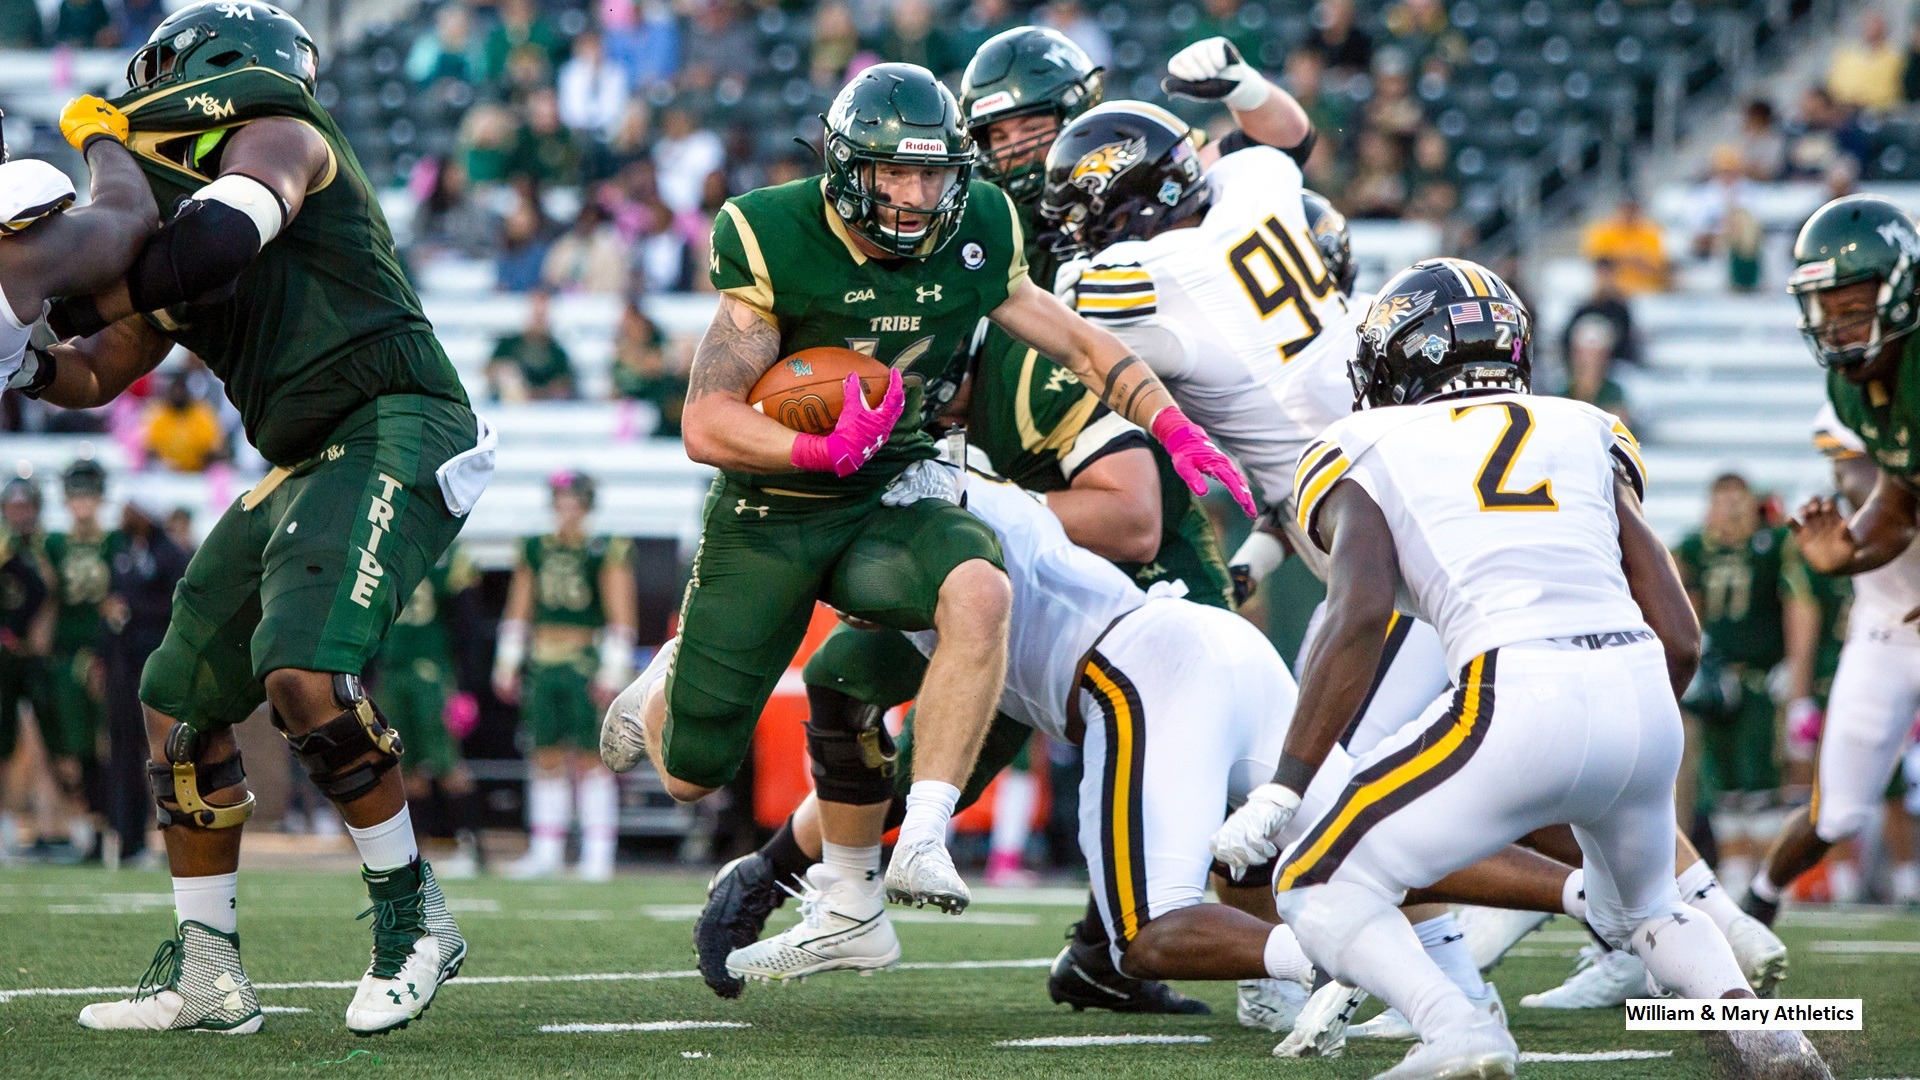 FCS Quarterfinal-Round Playoff Preview and Prediction: William & Mary at Montana State